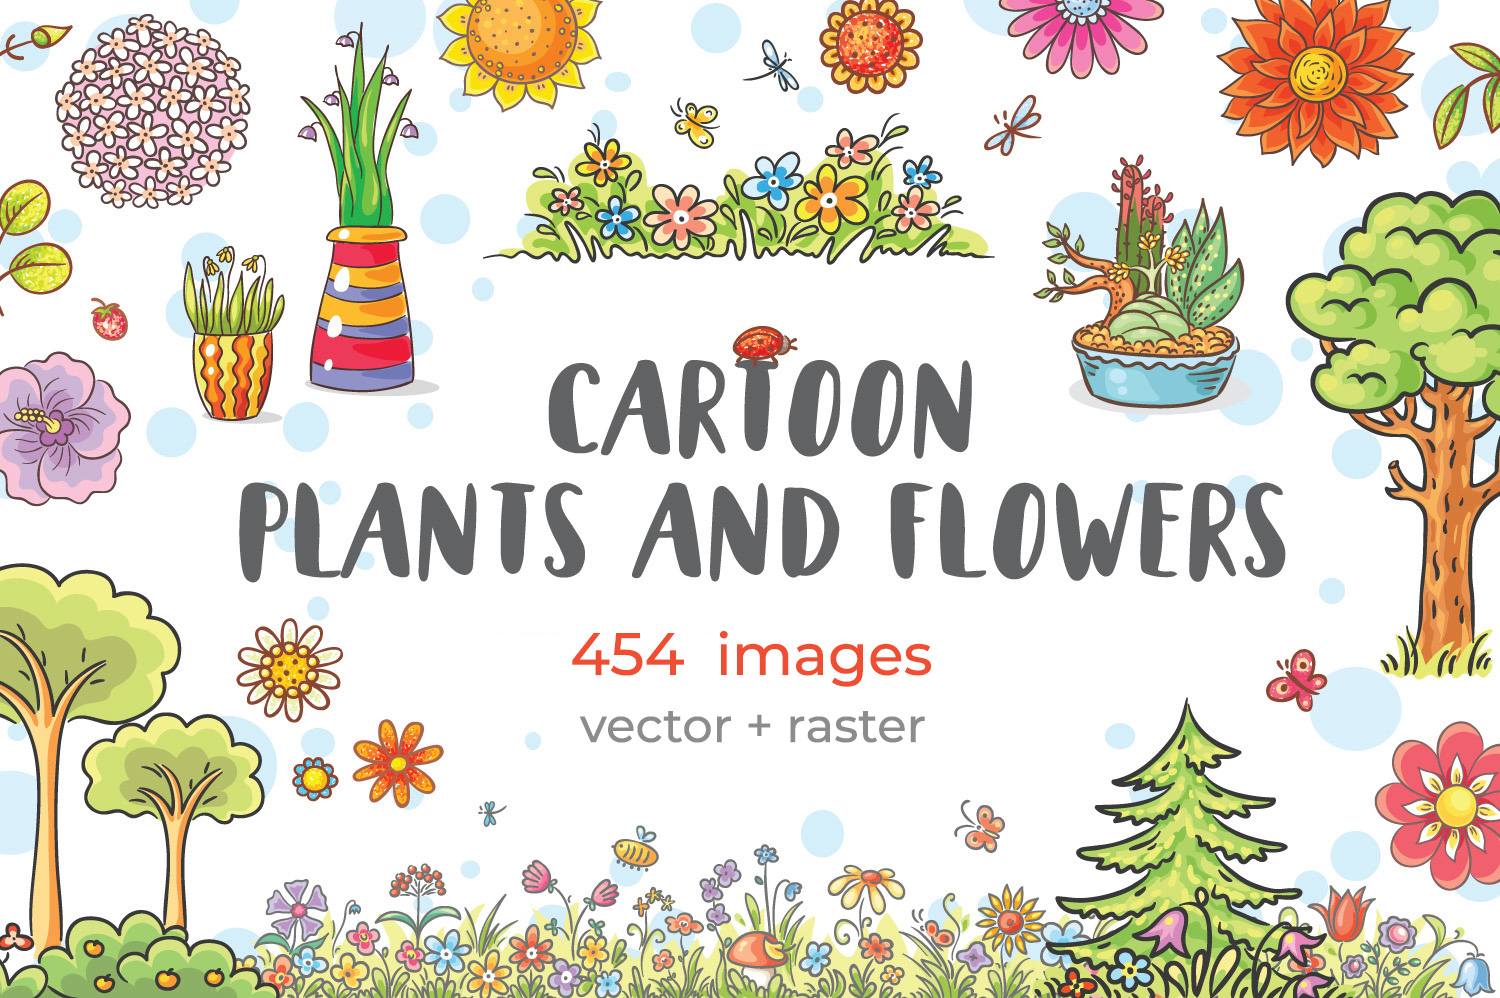 Cartoon plants and flowers clipart set. Hand drawn vector illustration